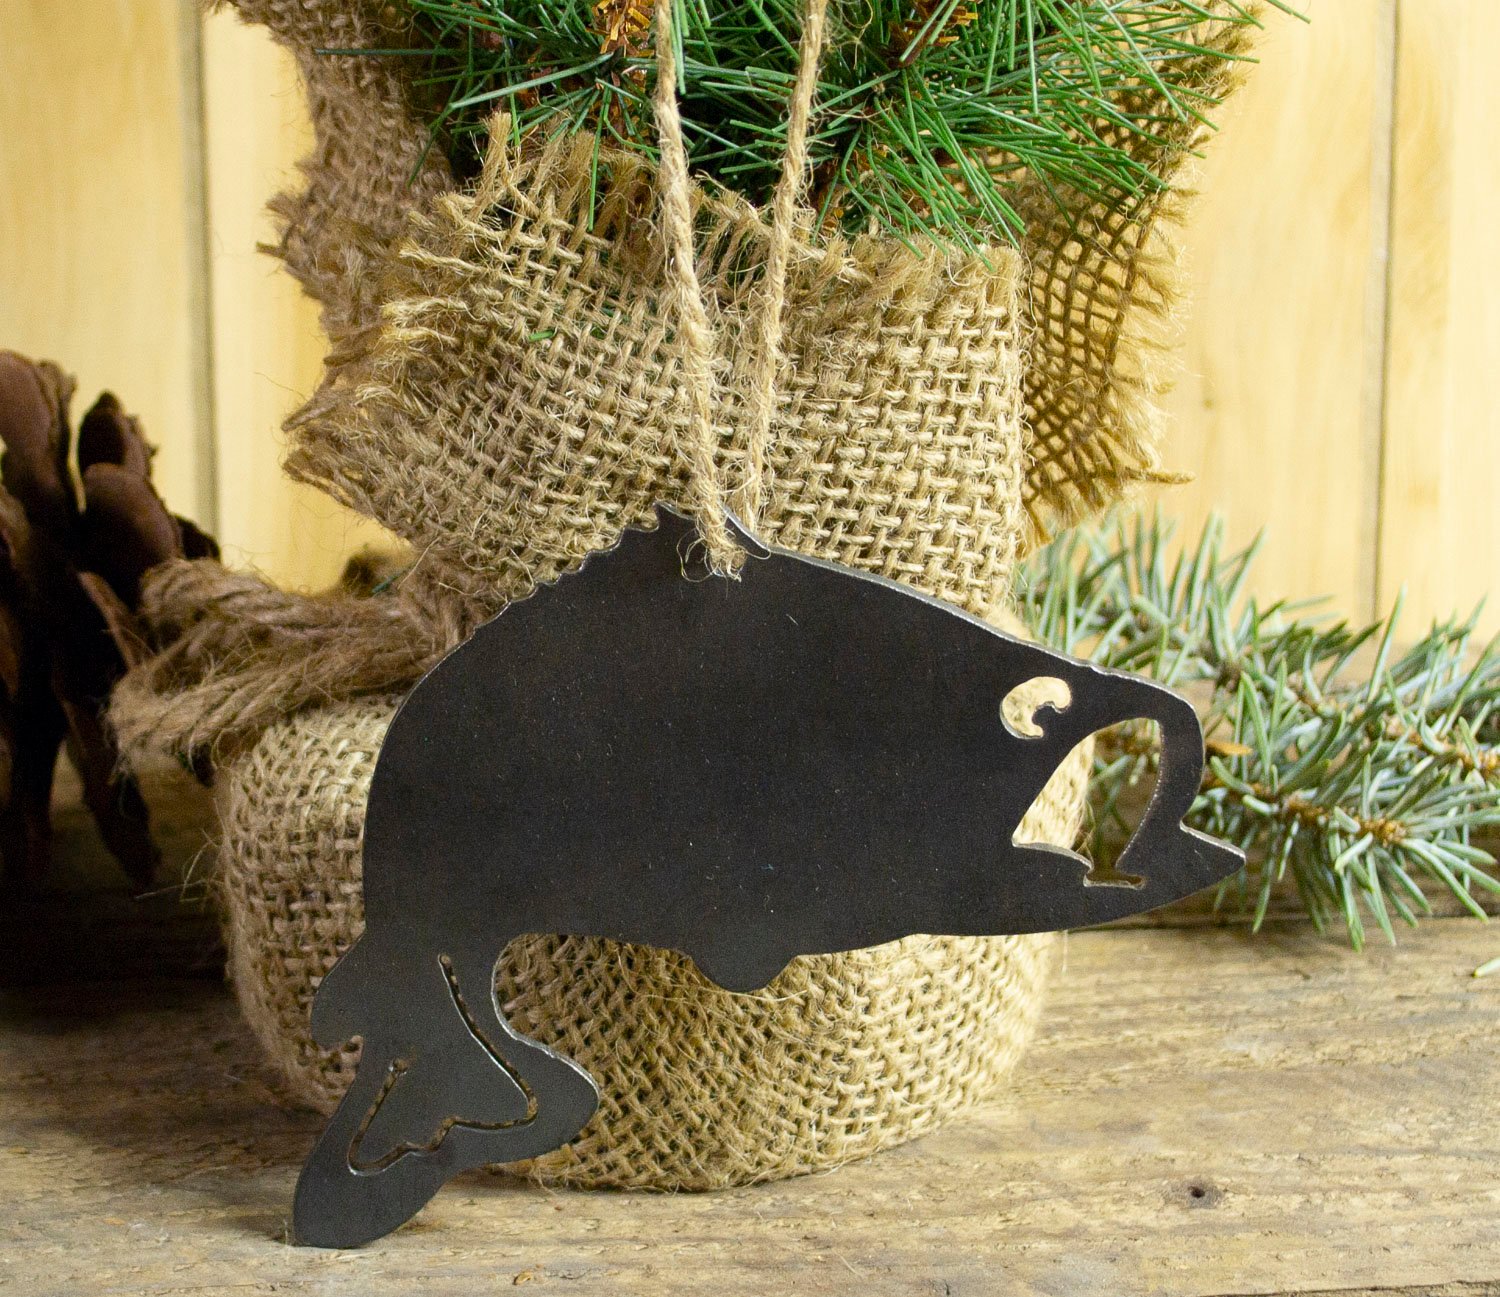 Bass Fish Wide Mouth Metal Christmas Ornament Tree Stocking Stuffer Party Favor Holiday Decoration Raw Steel Gift Recycled Nature Home Decor